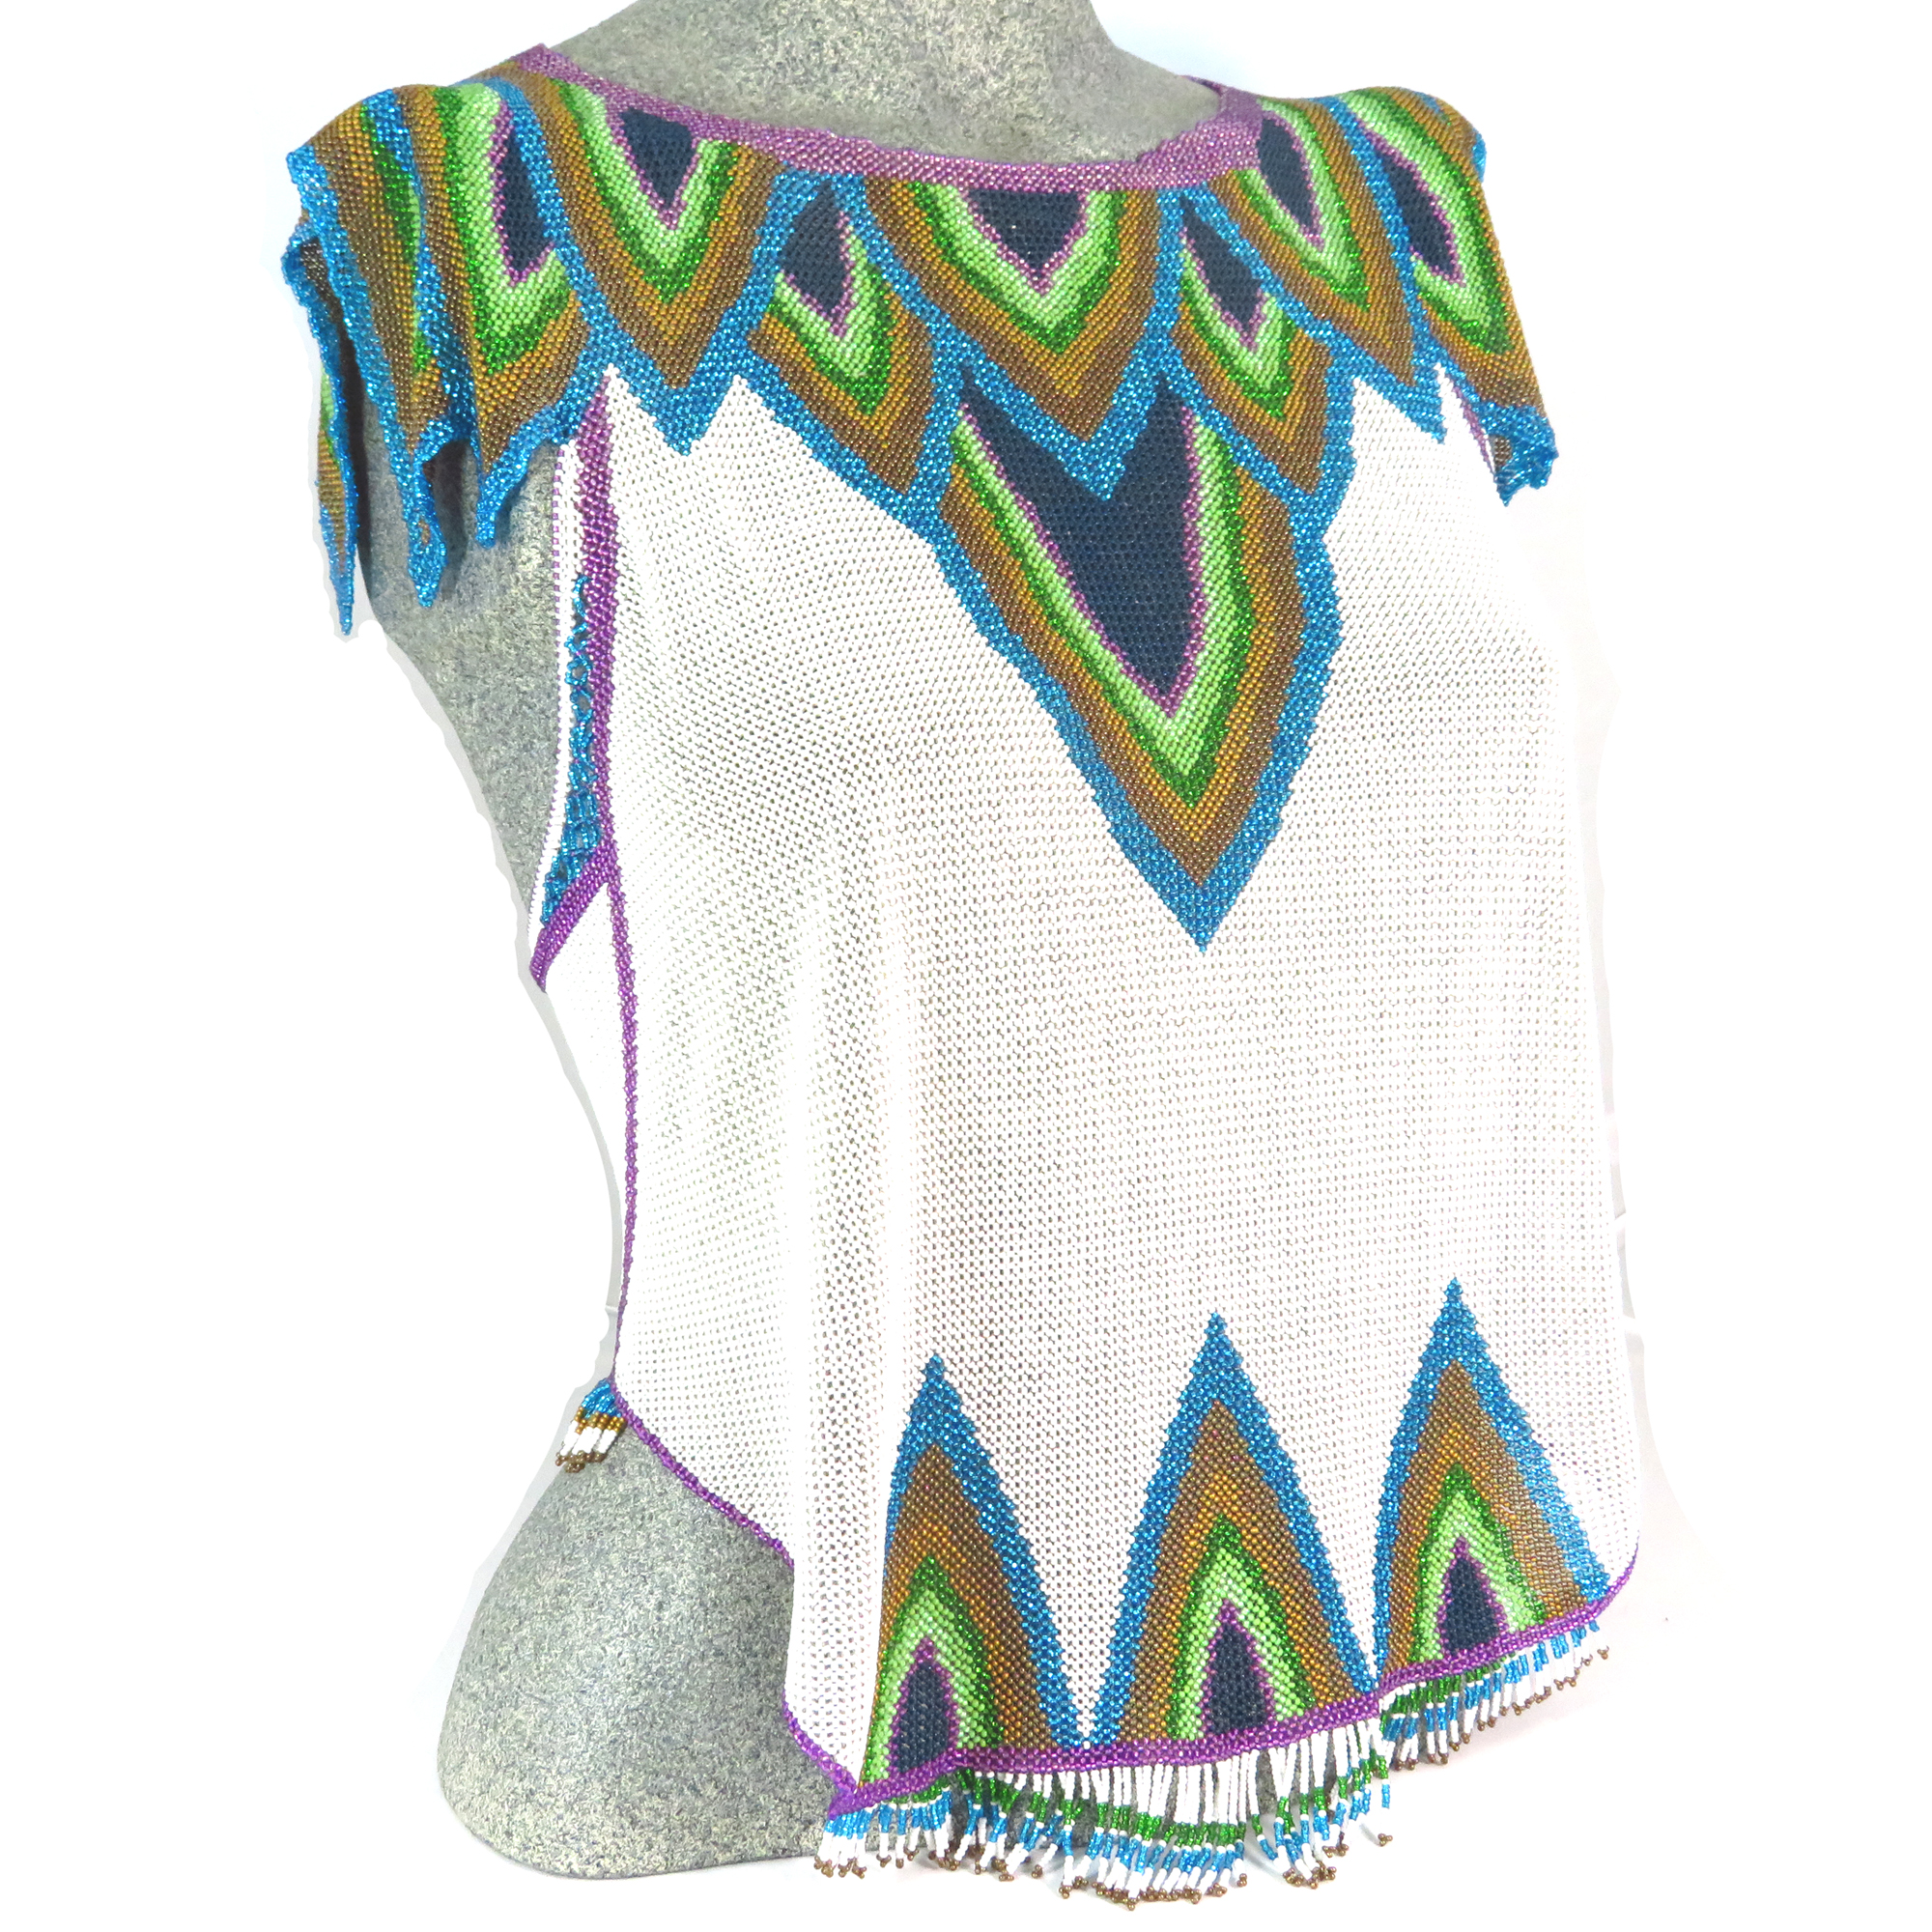 One of a kind beaded fashion, women's evening top, artisan clothing by Bonnie Van Hall